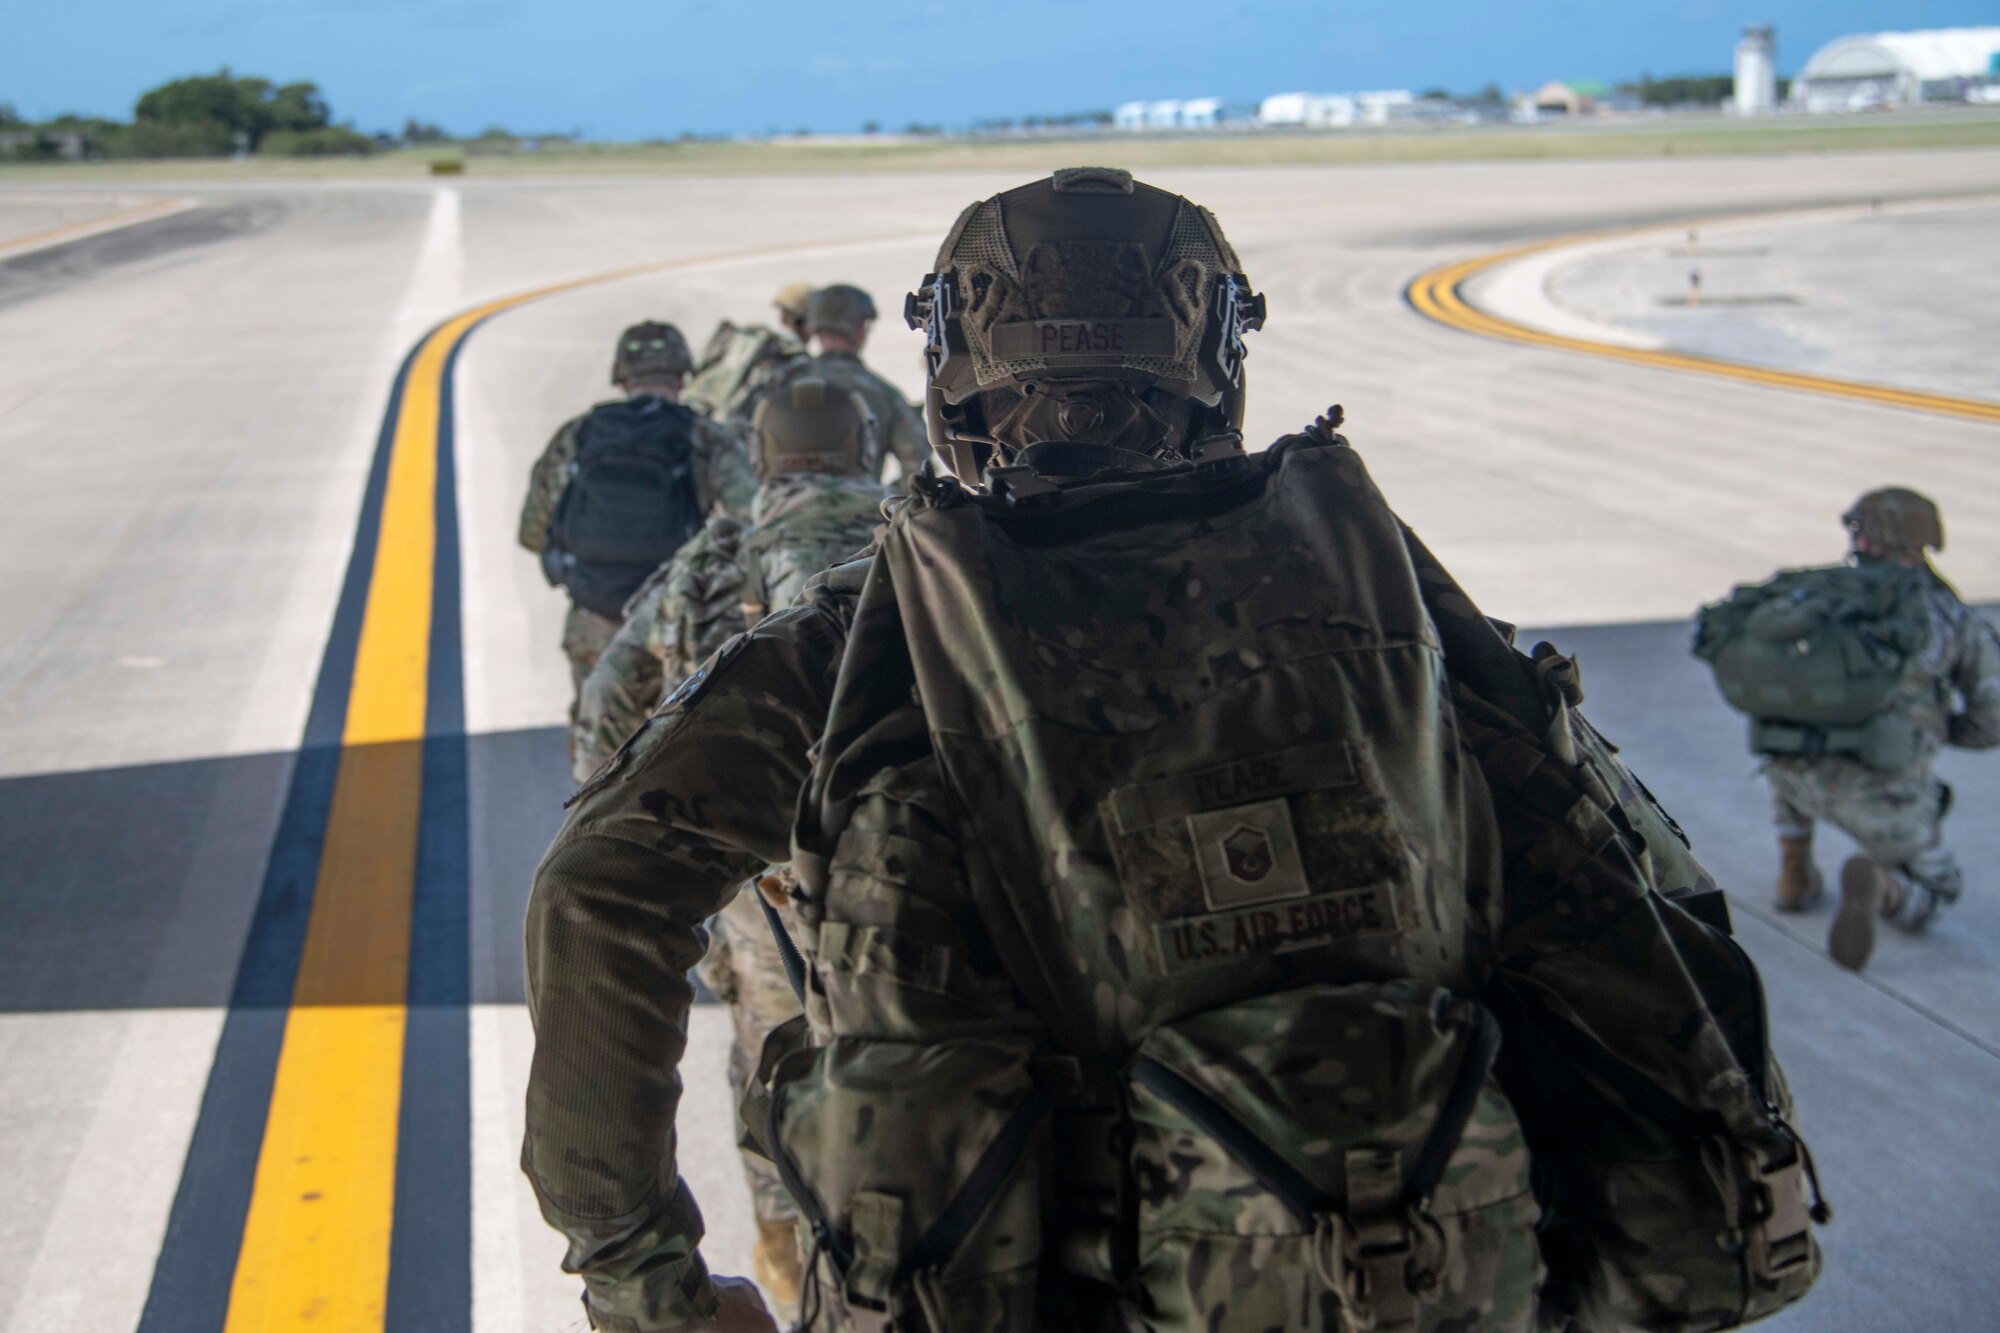 U.S. Air Force Airmen from the 820th Base Defense Group and a U.S. Army soldier run out of the back of a C-130J Super Hercules to perform a simulated airfield seizure at the Rafael Hernández International Airport, Puerto Rico, Feb. 25, 2023. These forces were supporting Operation Forward Tiger, an Air Forces Southern exercise designed to increase combat readiness alongside humanitarian assistance and disaster response capabilities with U.S. partners and allies throughout the Caribbean. (U.S. Air Force photo by 1st Lt. Christian Little)